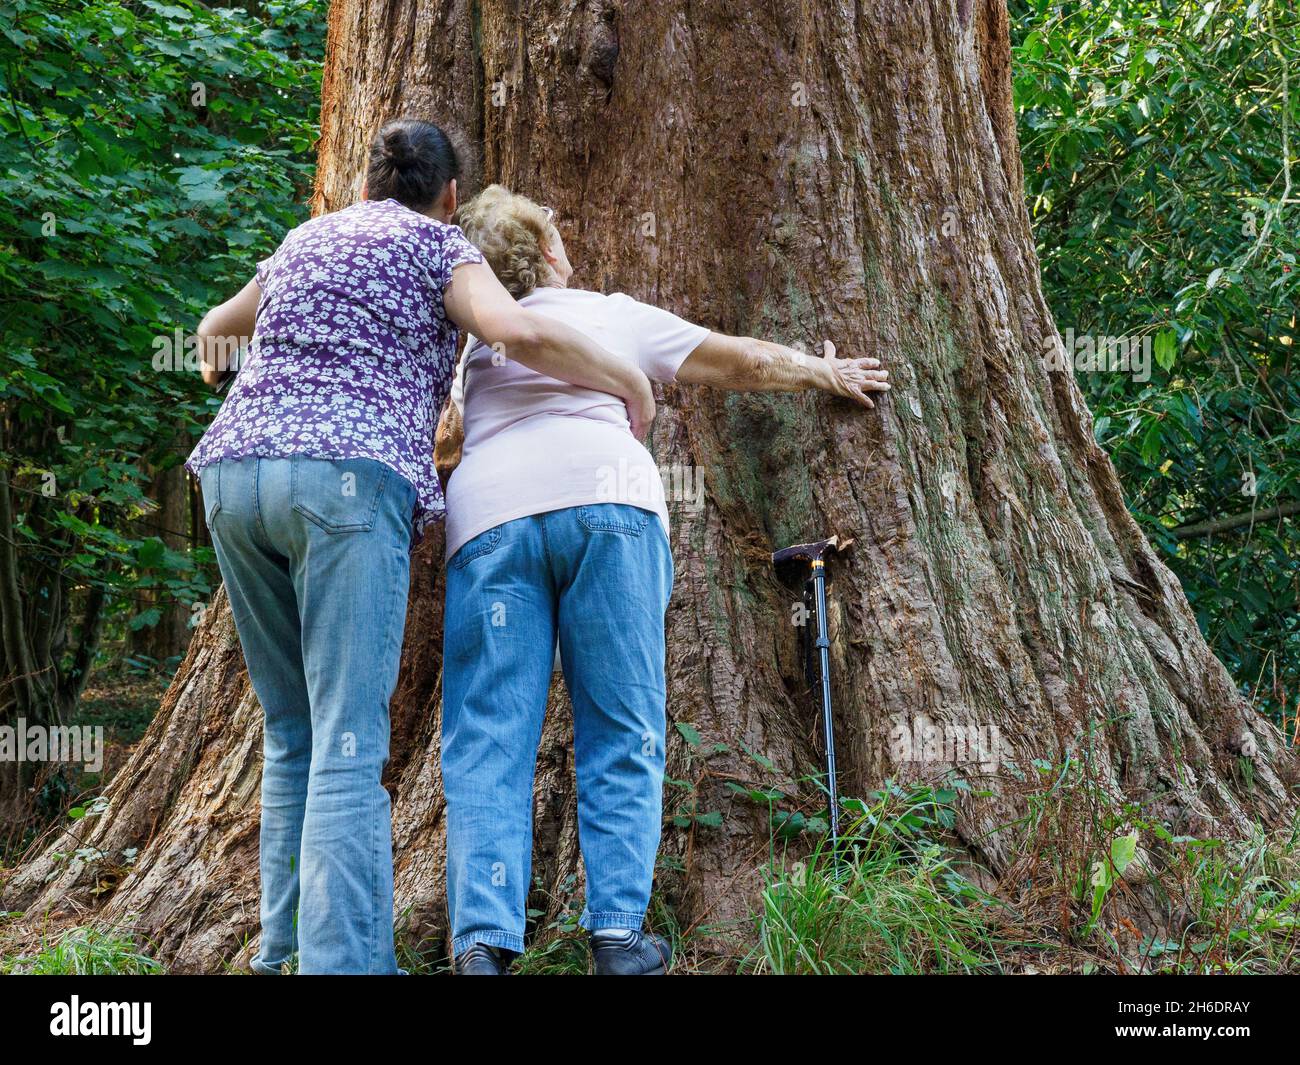 Senior citizen looking up at a giant tree with help of daughter / carer, UK Stock Photo